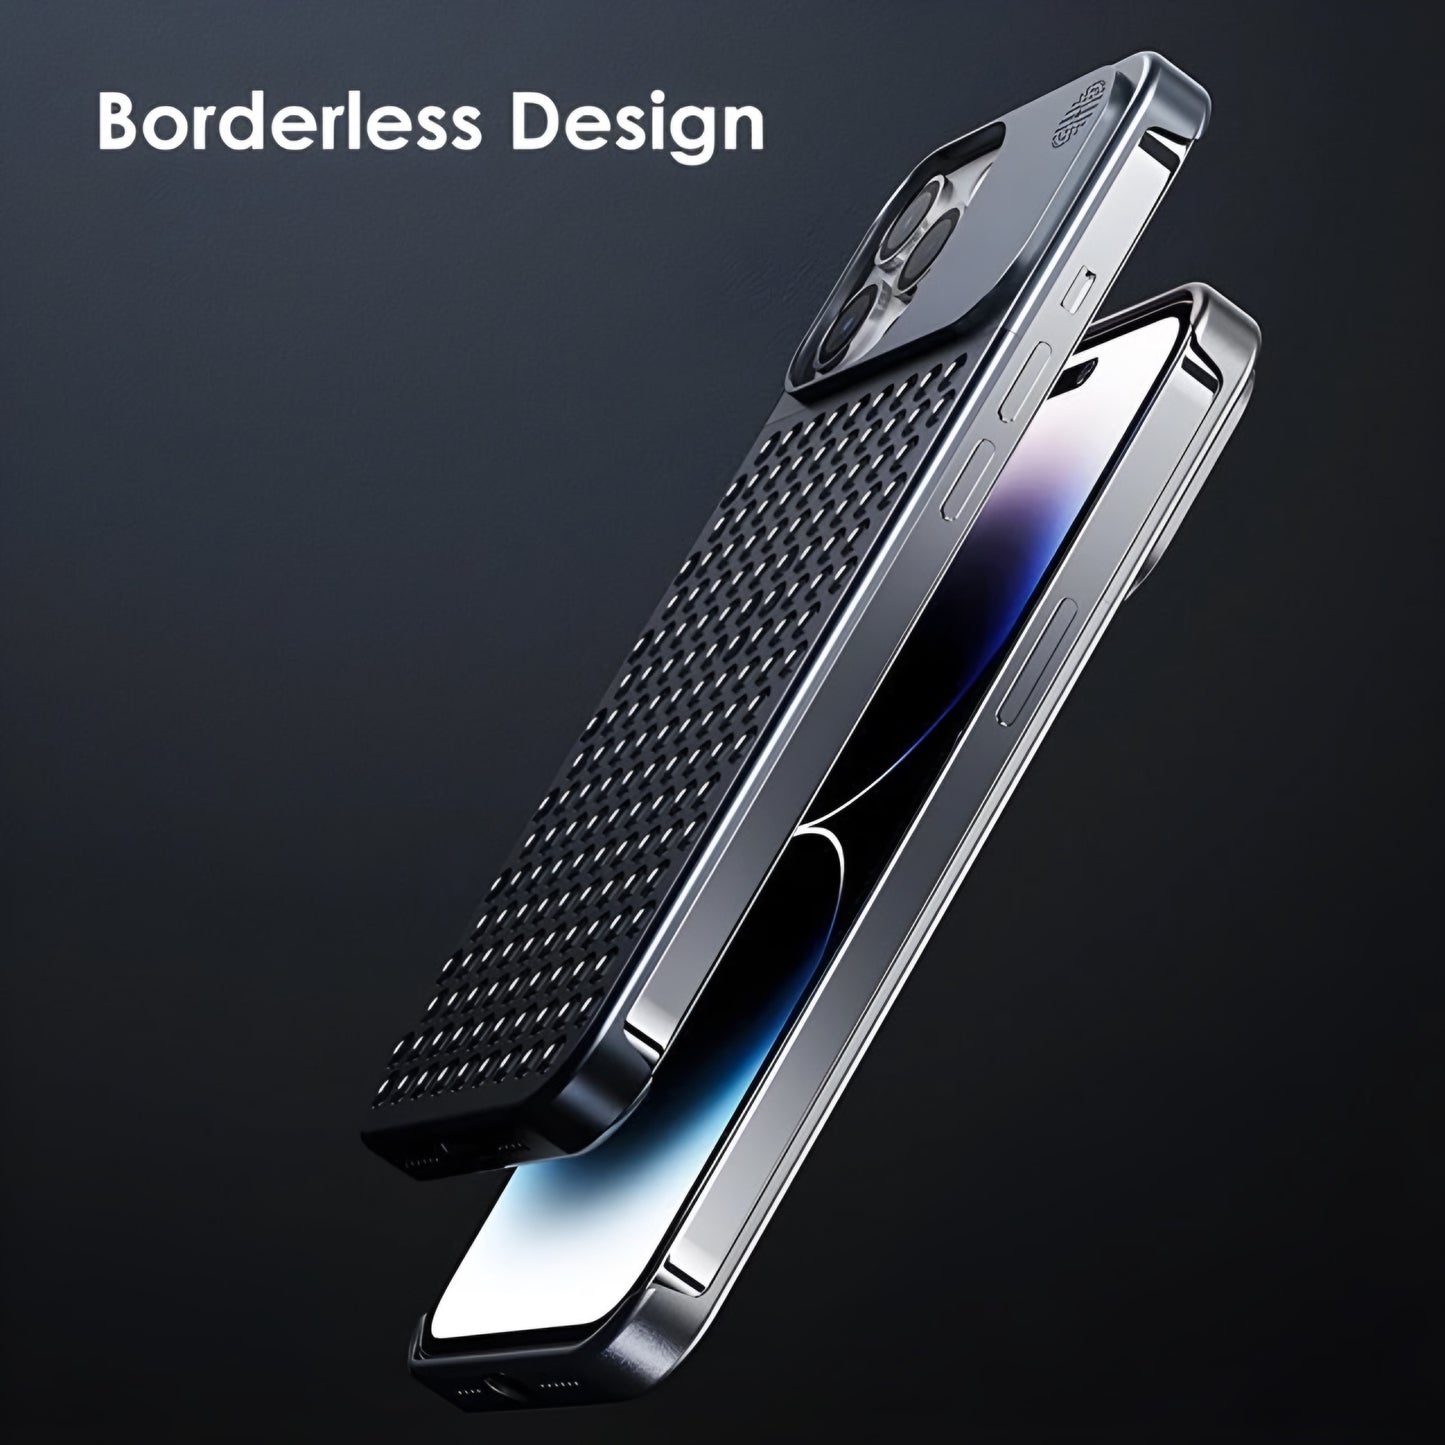 Metal Cooling iPhone Case